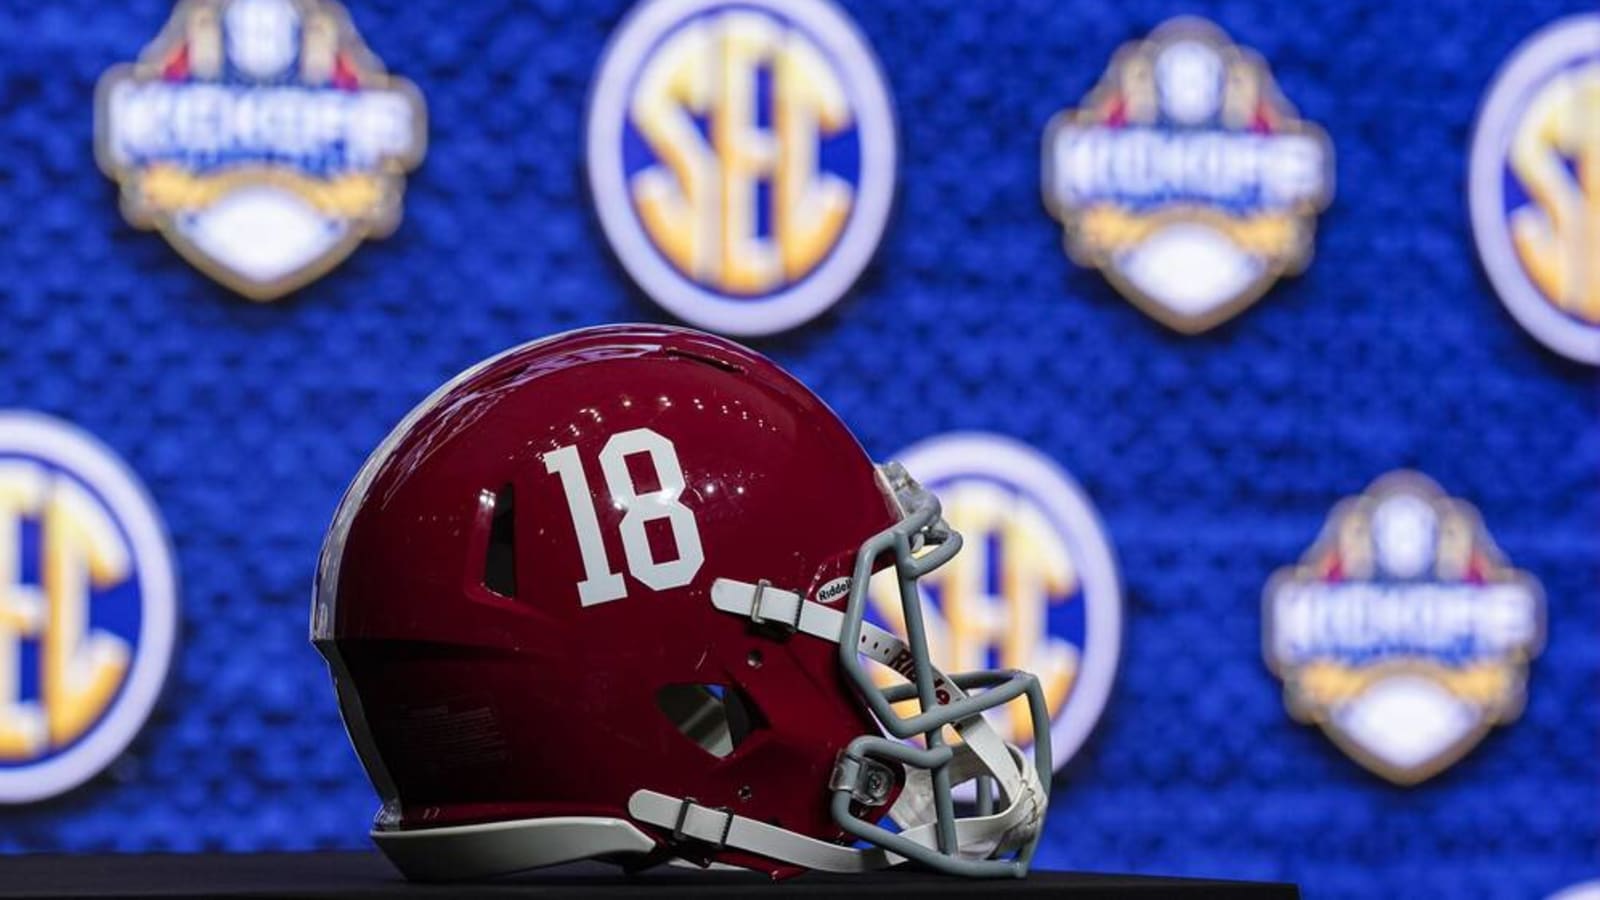 The Ranking of the Top SEC Transfer Portal Losers